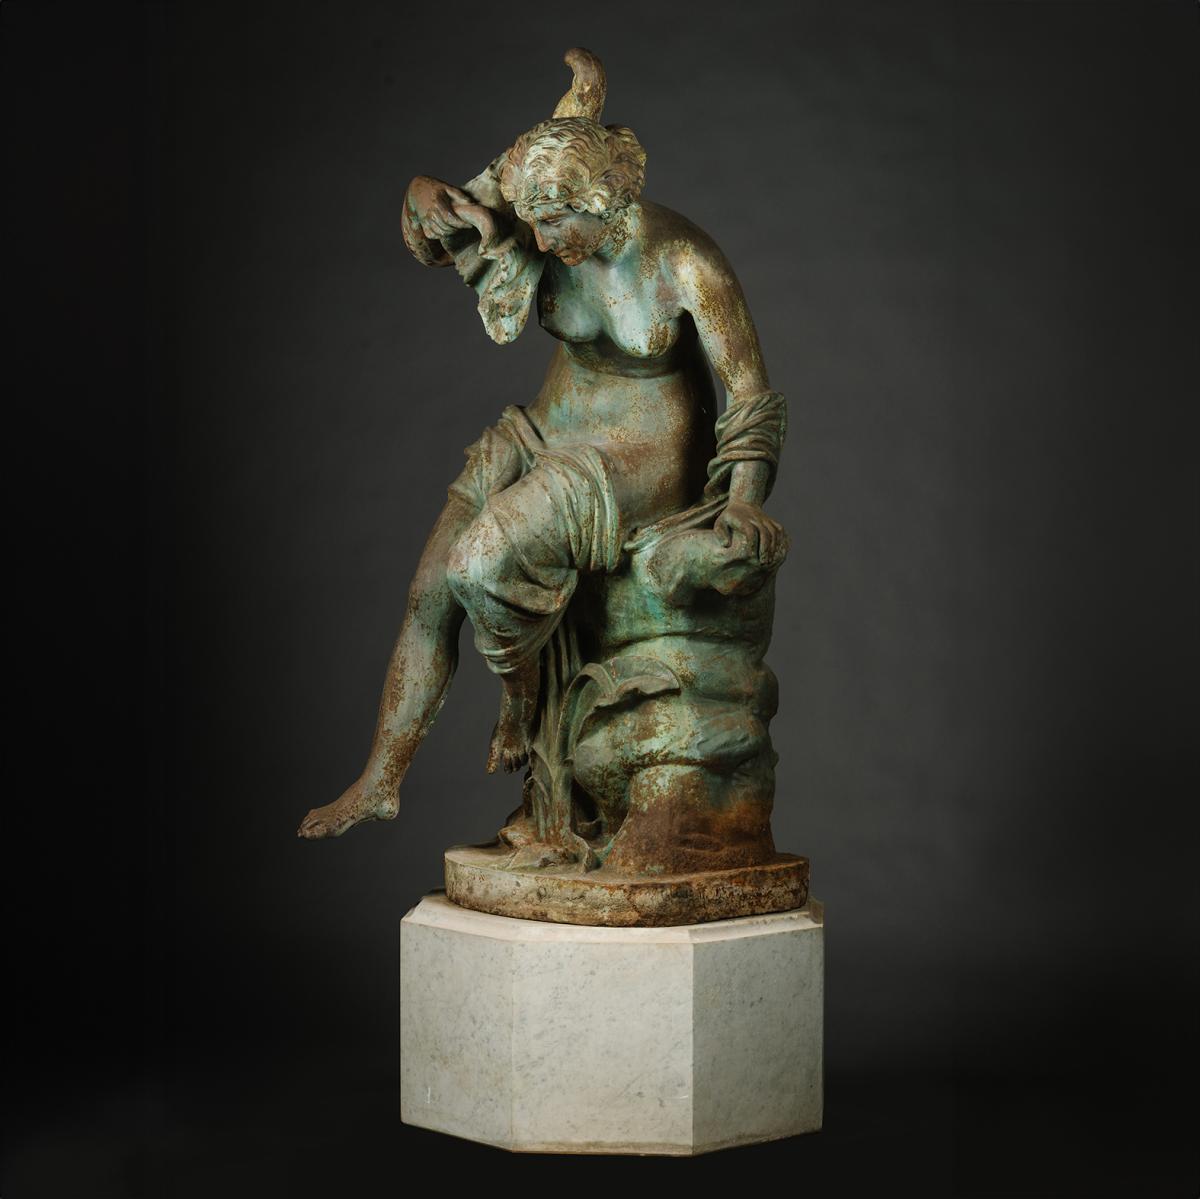 Cast Iron Fountain Figure of a Water Nymph